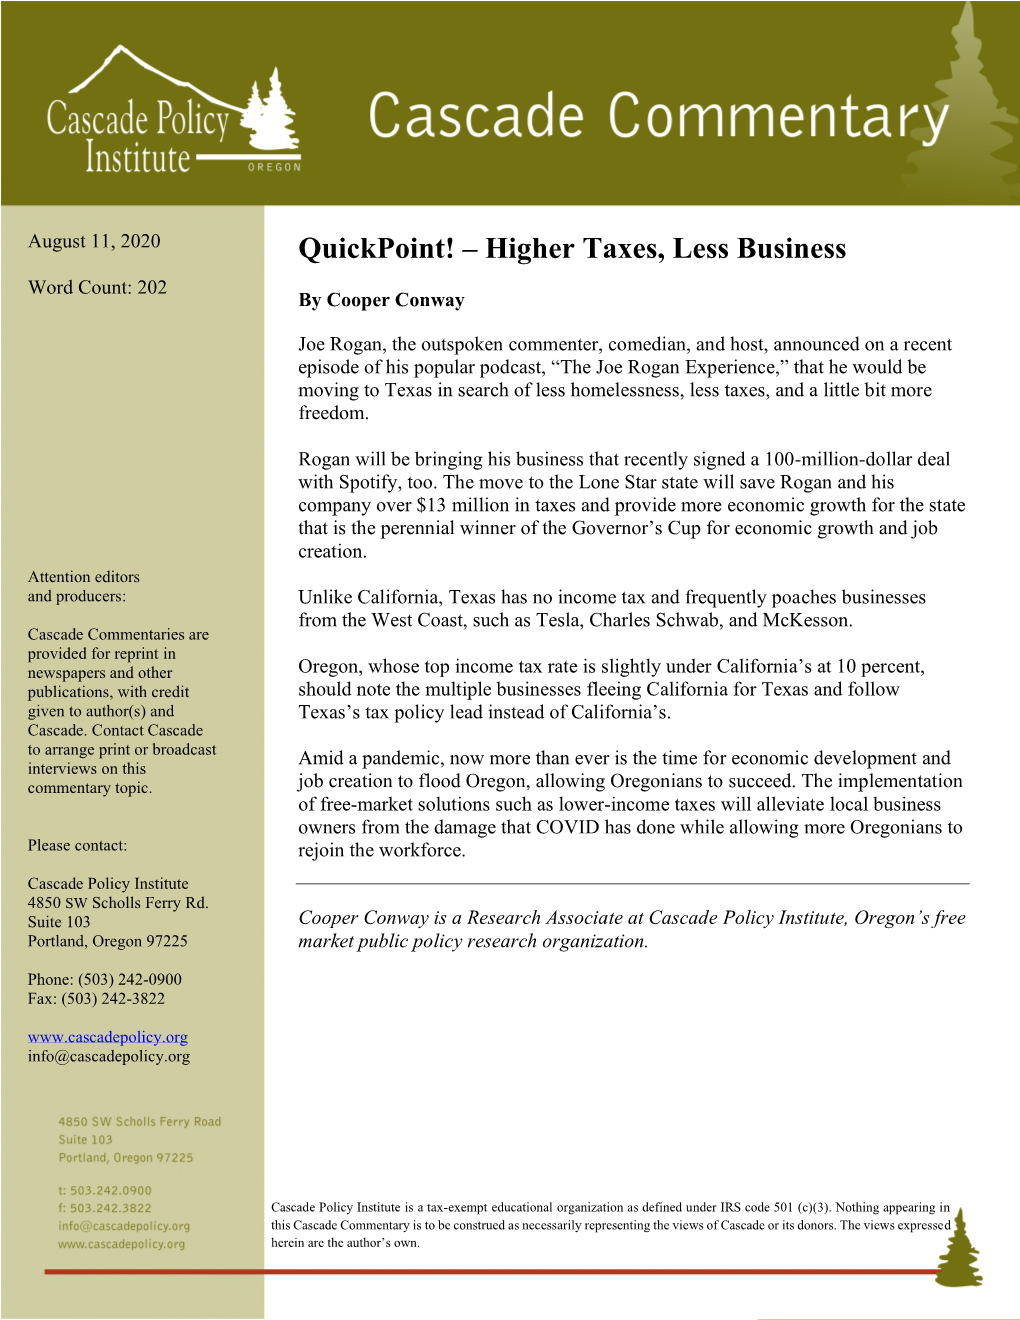 Quickpoint! – Higher Taxes, Less Business